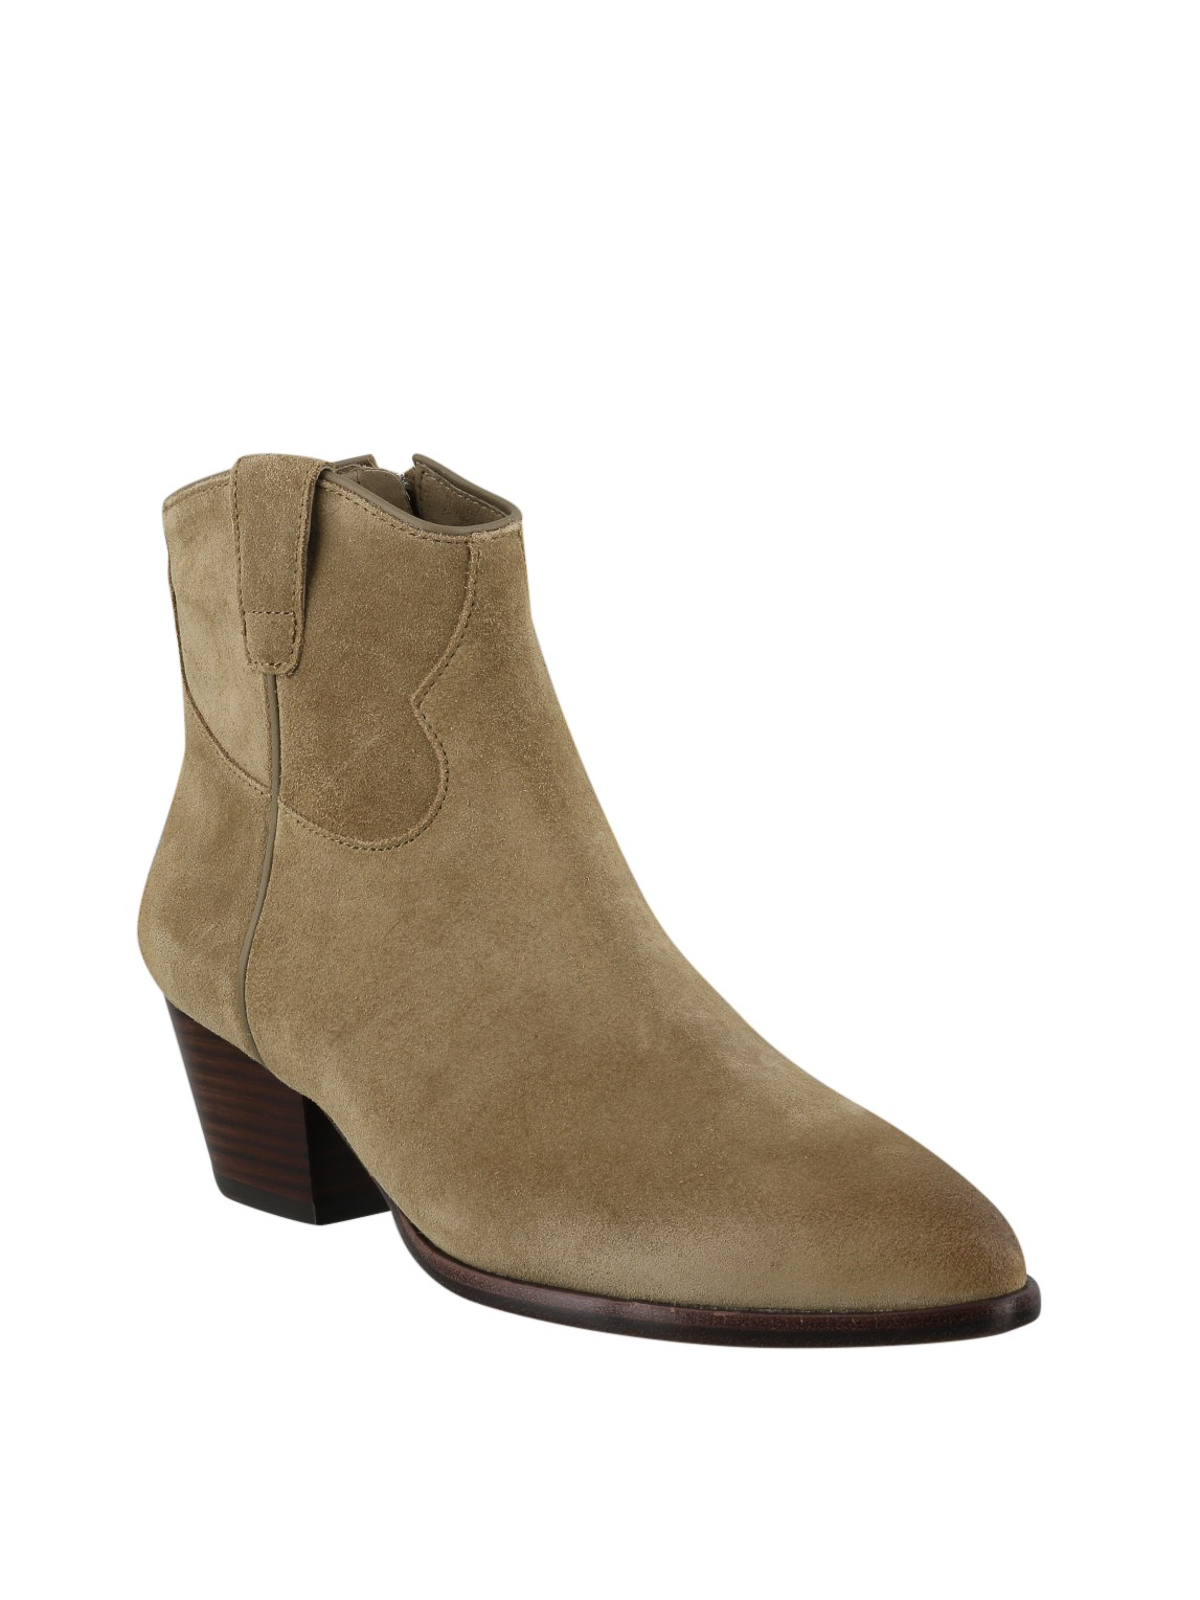 buy ankle boots online